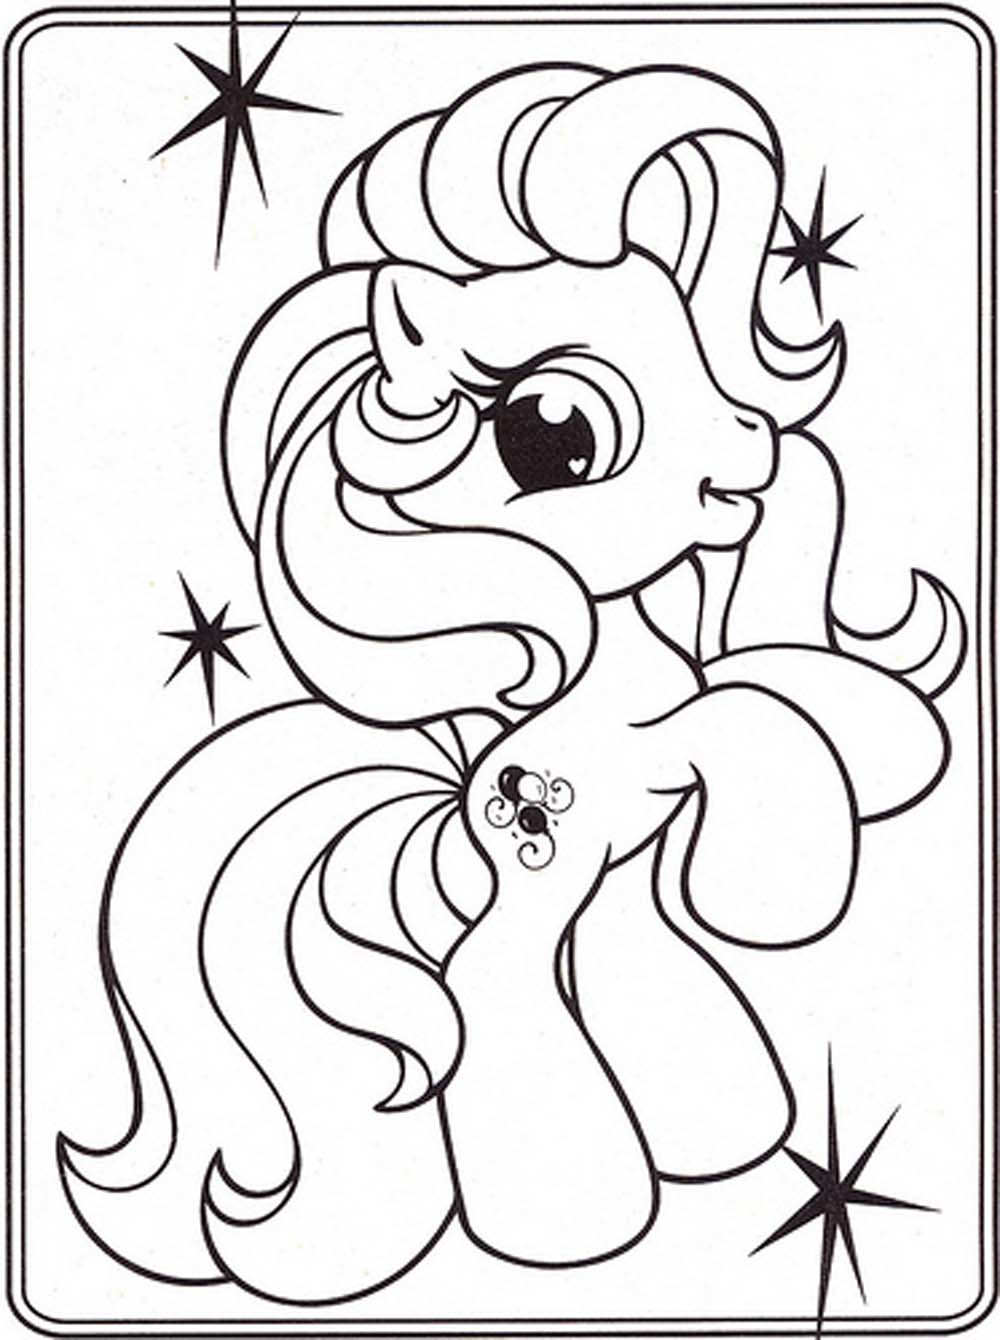 Print & Download - My Little Pony Coloring Pages: Learning with Fun